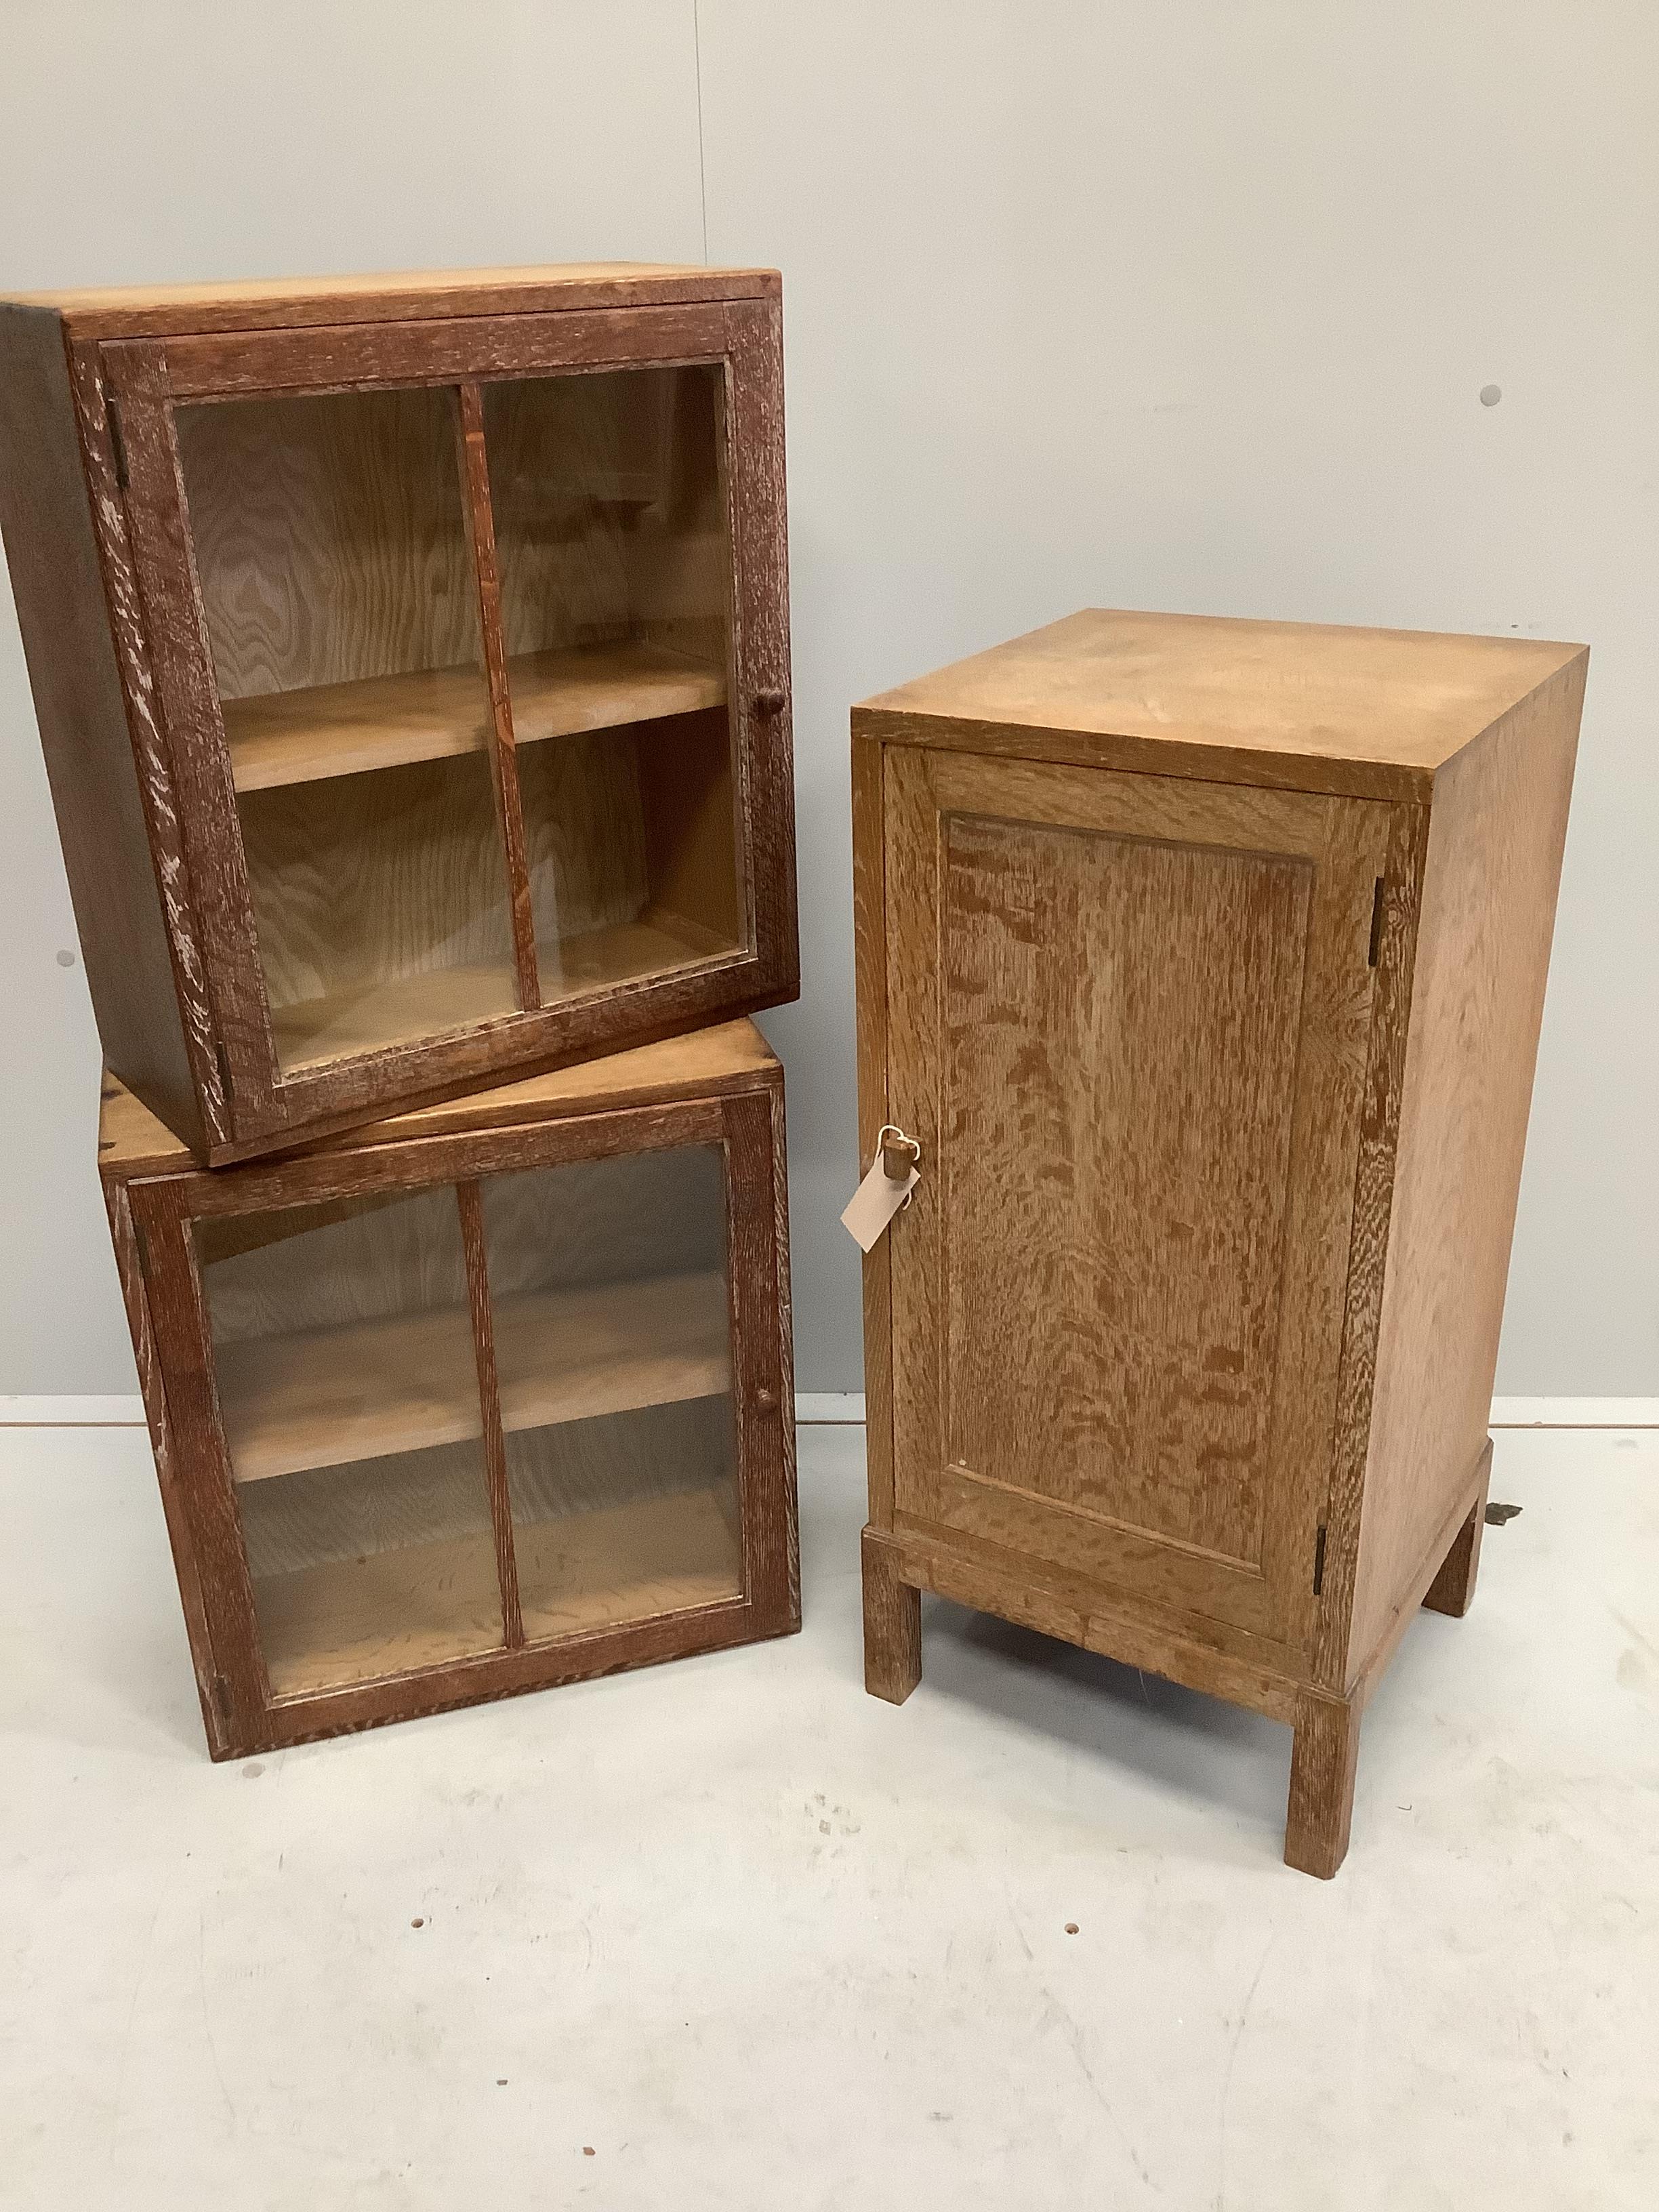 Heal & Son Ltd. London, a bleached oak bedside cabinet, width 36cm, depth 35cm, height 76cm, together with a pair of similar wall cabinets